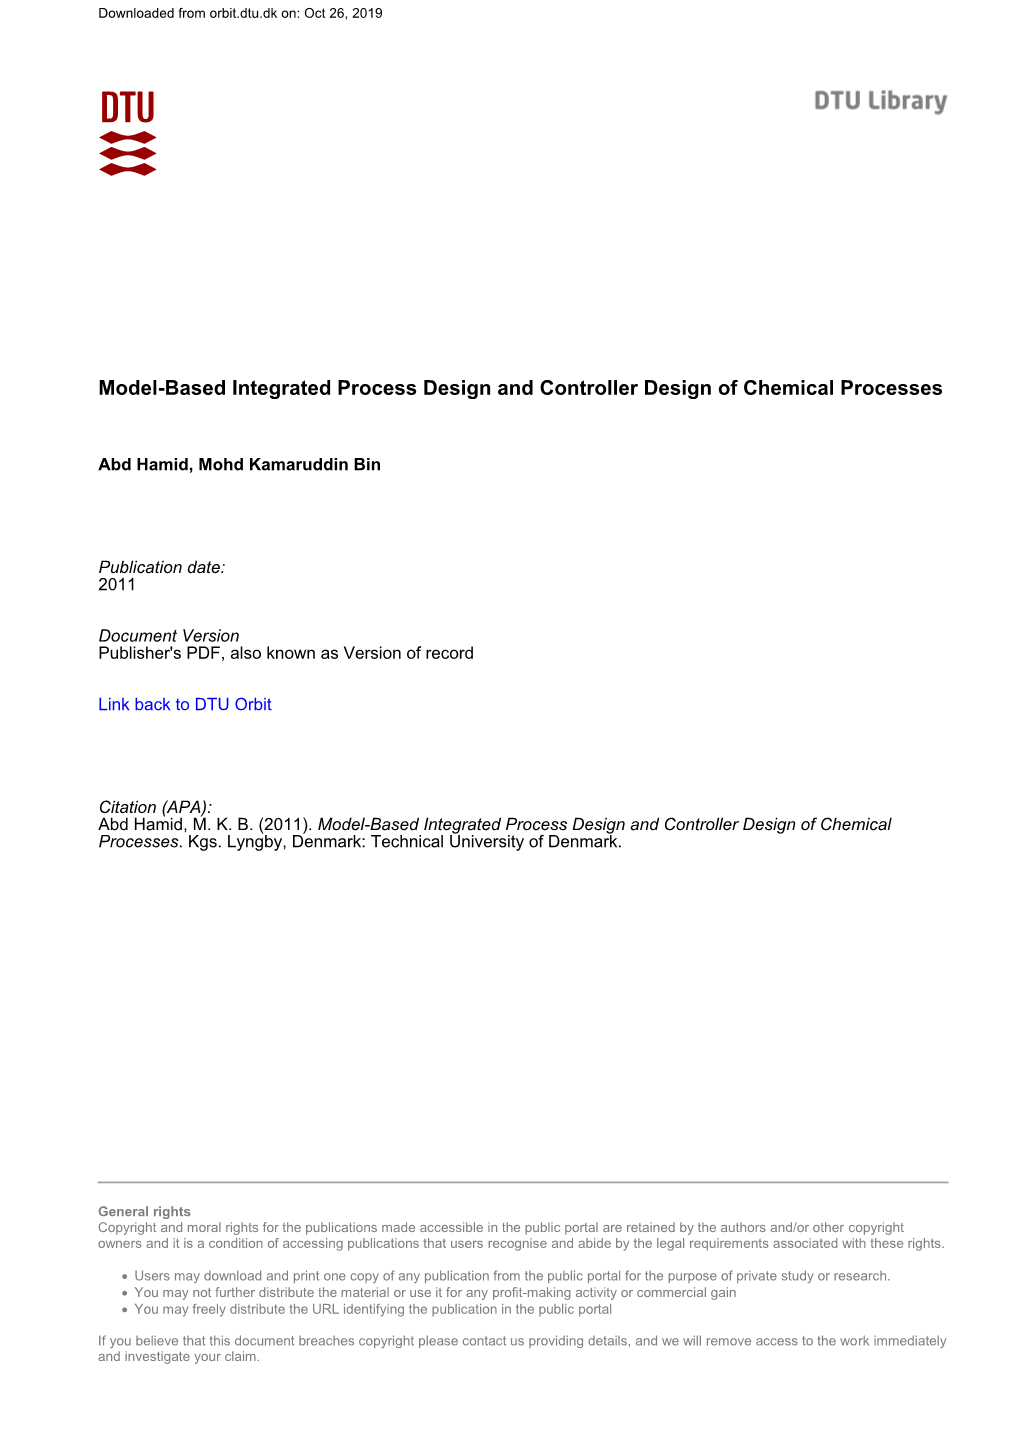 Model-Based Integrated Process Design and Controller Design of Chemical Processes